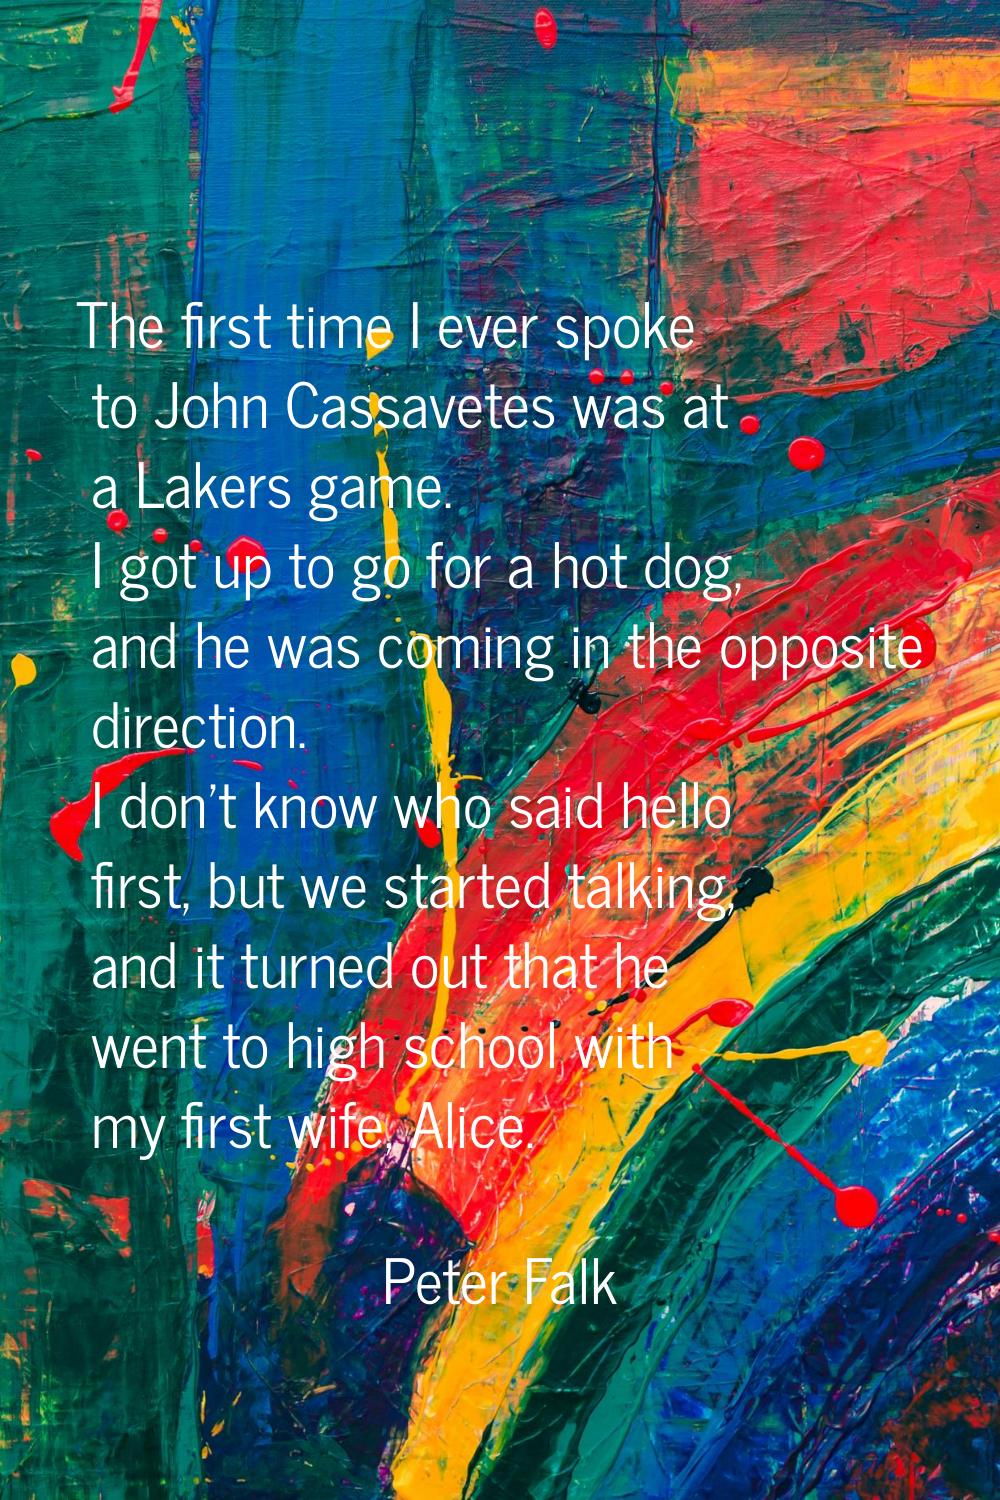 The first time I ever spoke to John Cassavetes was at a Lakers game. I got up to go for a hot dog, 